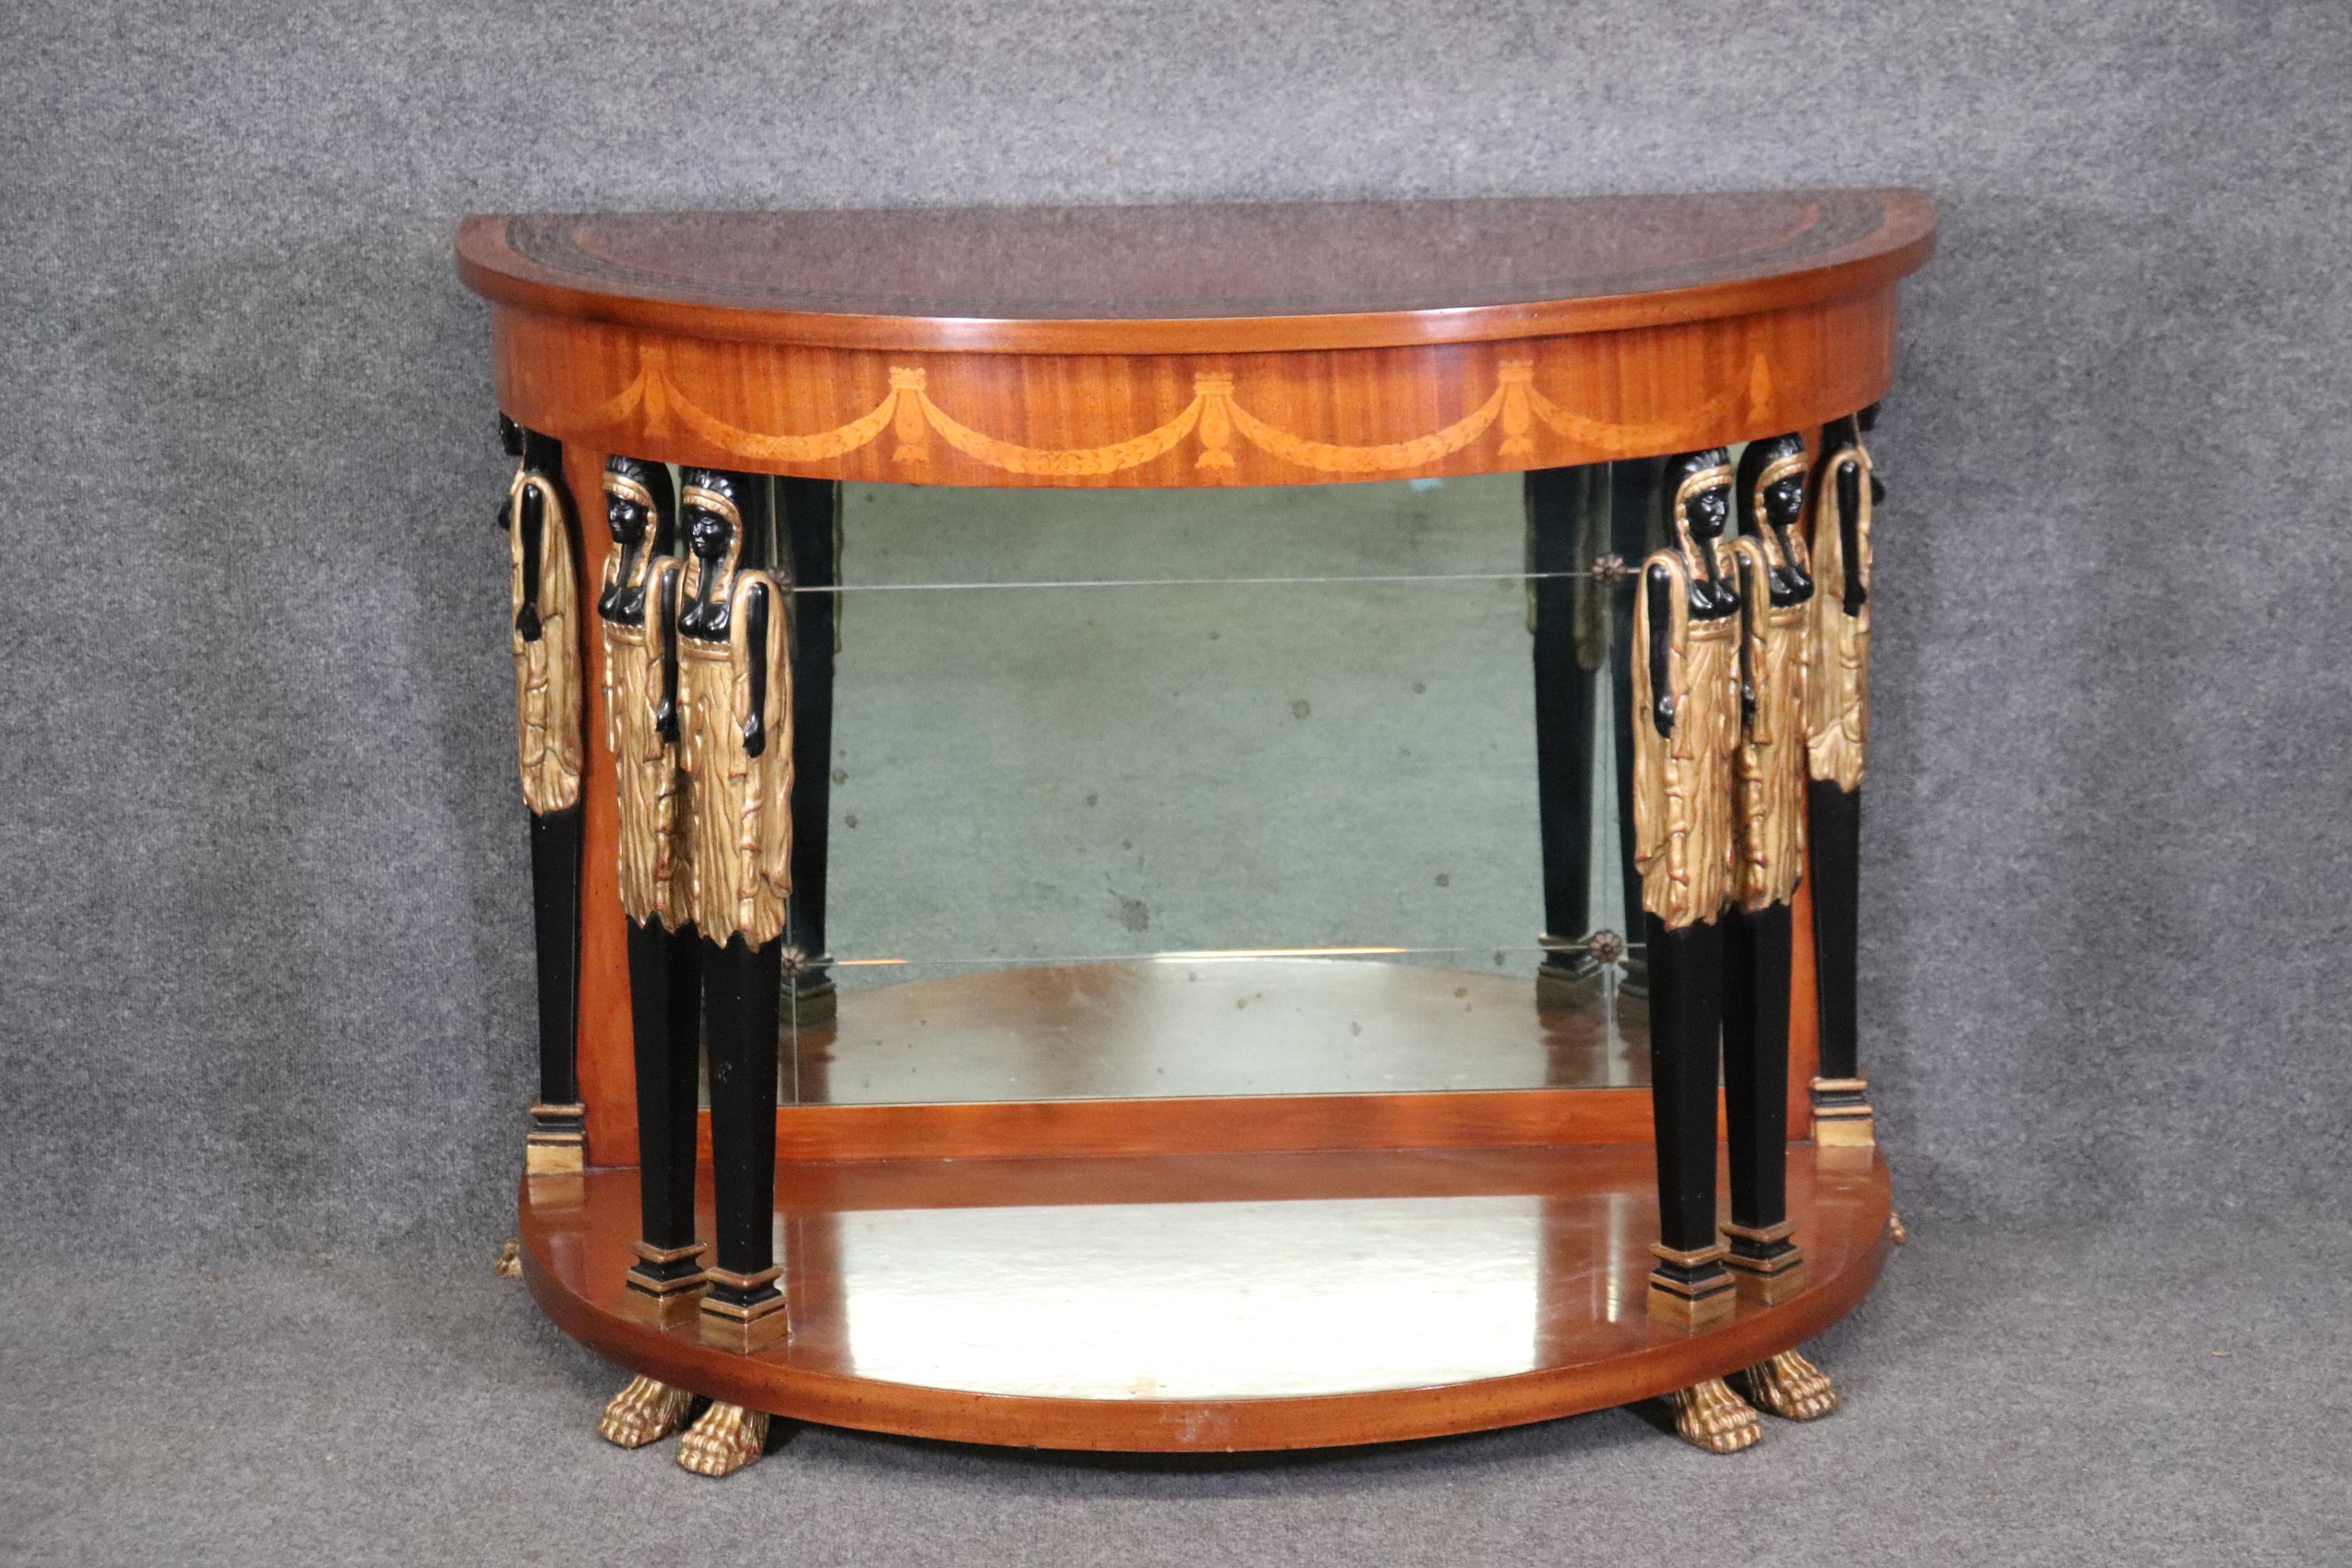 This is a fantastic Egyptian revival style inlaid satinwood and walnut demilune console table with painted and gilded figures and a faceted multi-paned mirrored back. The top is inlaid in a stretched Greek key motif and the table is in good original